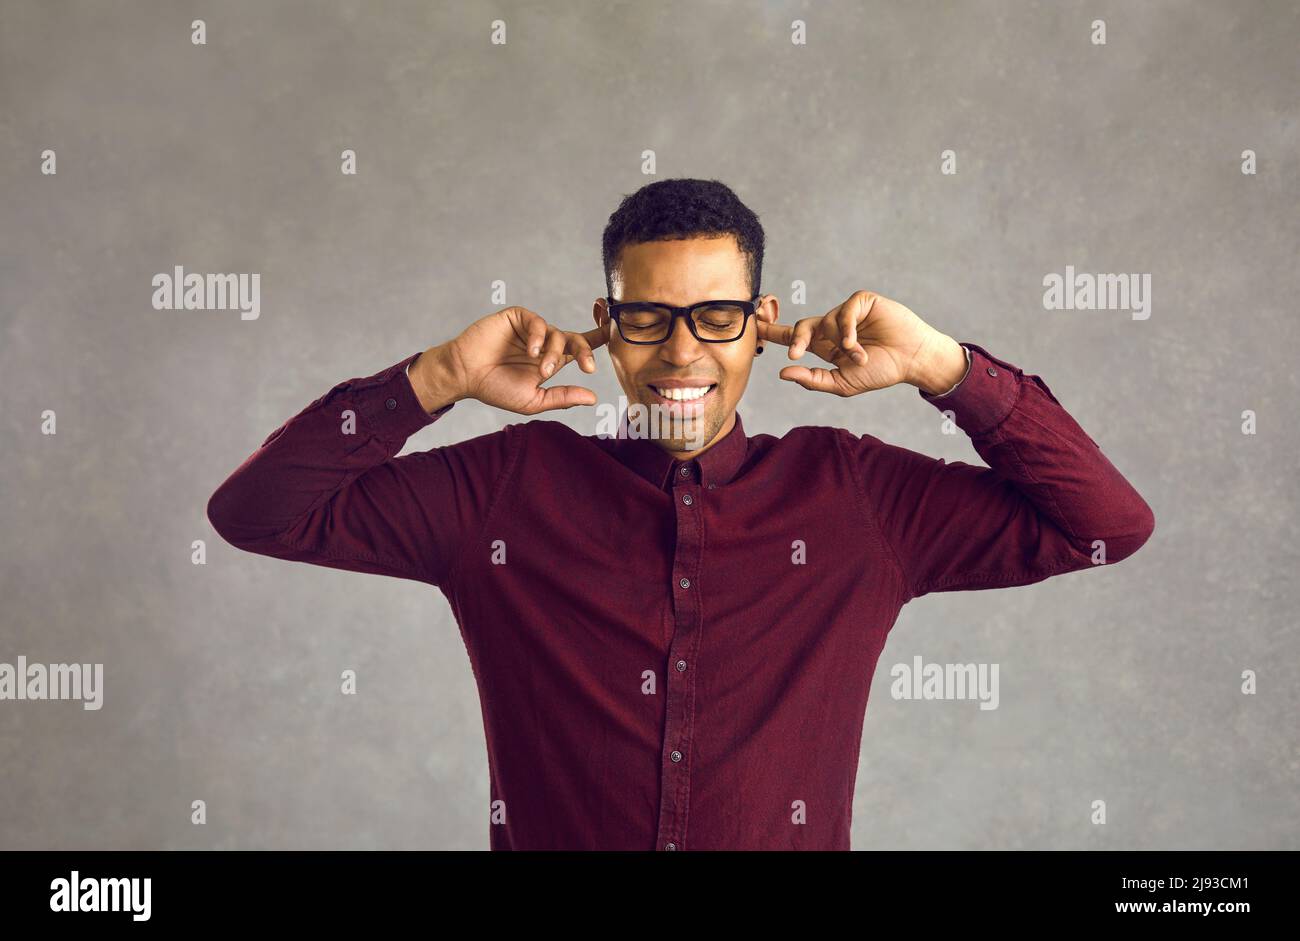 Man closes ears with fingers or earplugs to avoid listening to noise or unsolicited advice Stock Photo